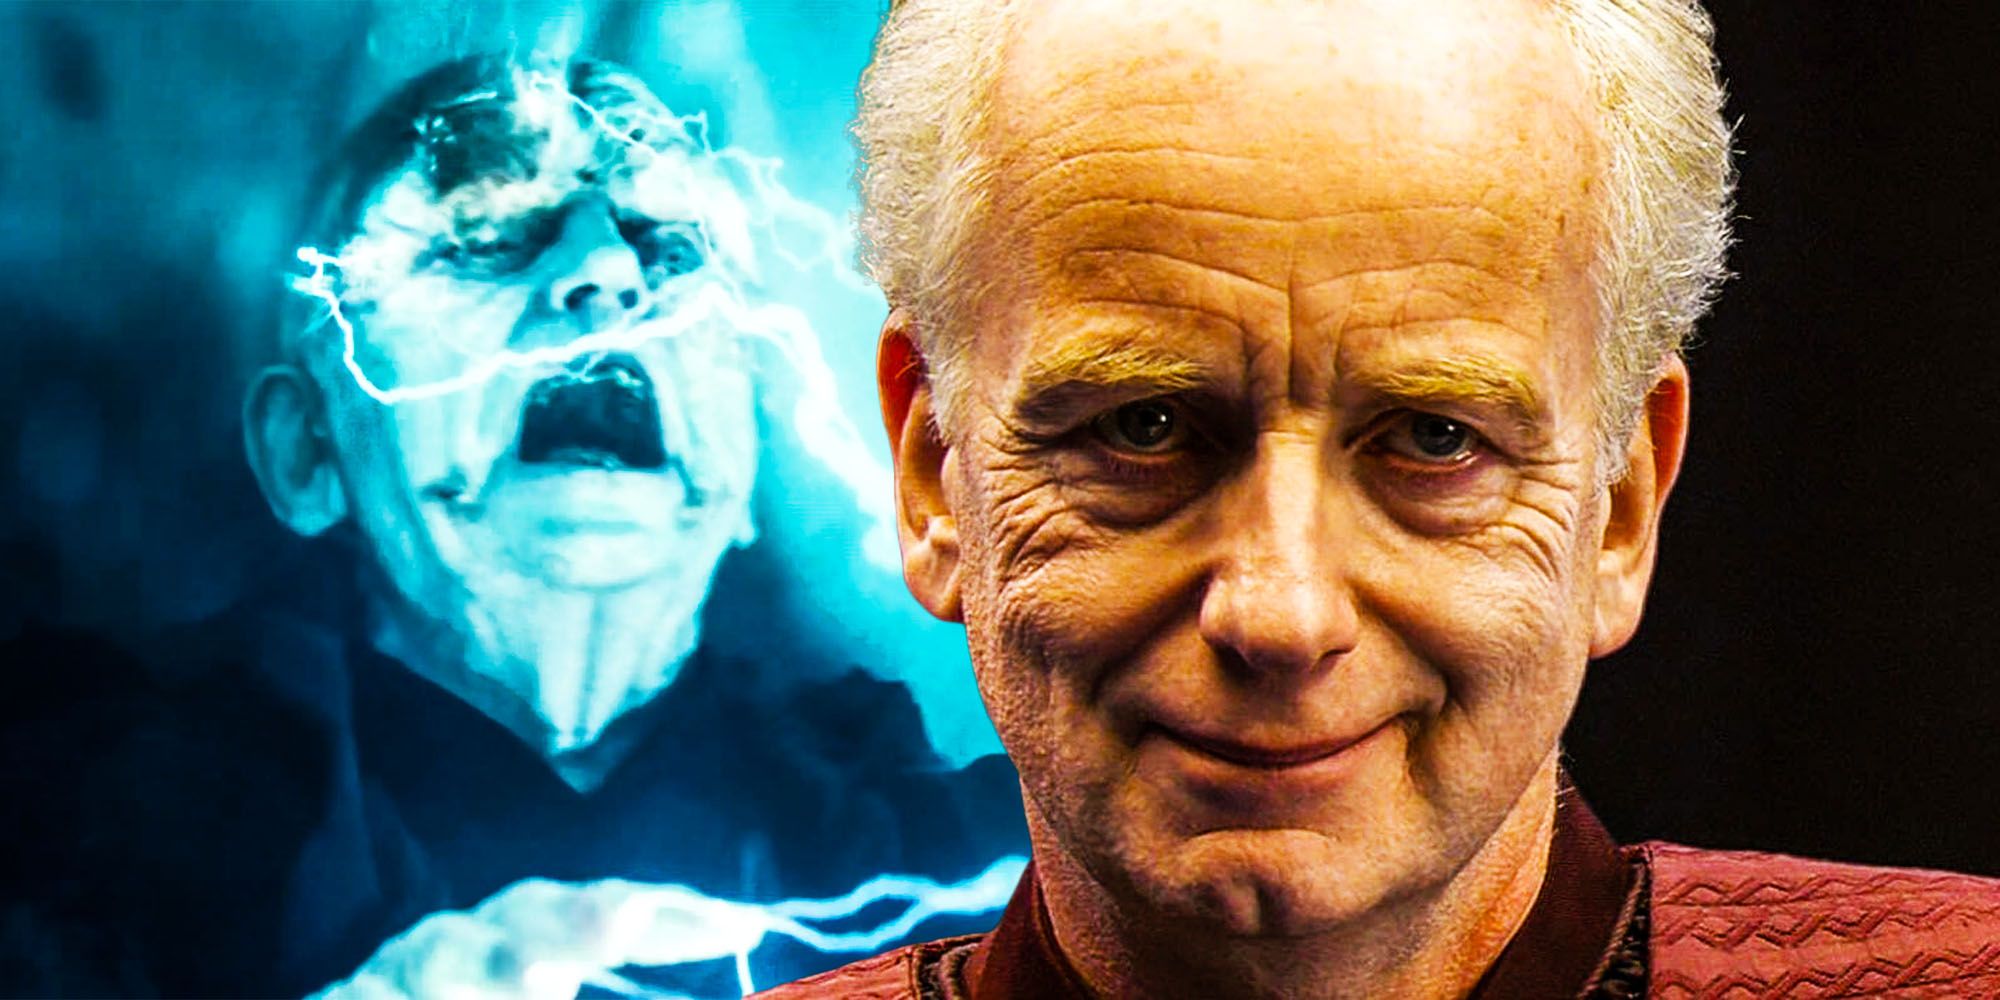 Palpatine could have survived Star Wars the rise of skywalker